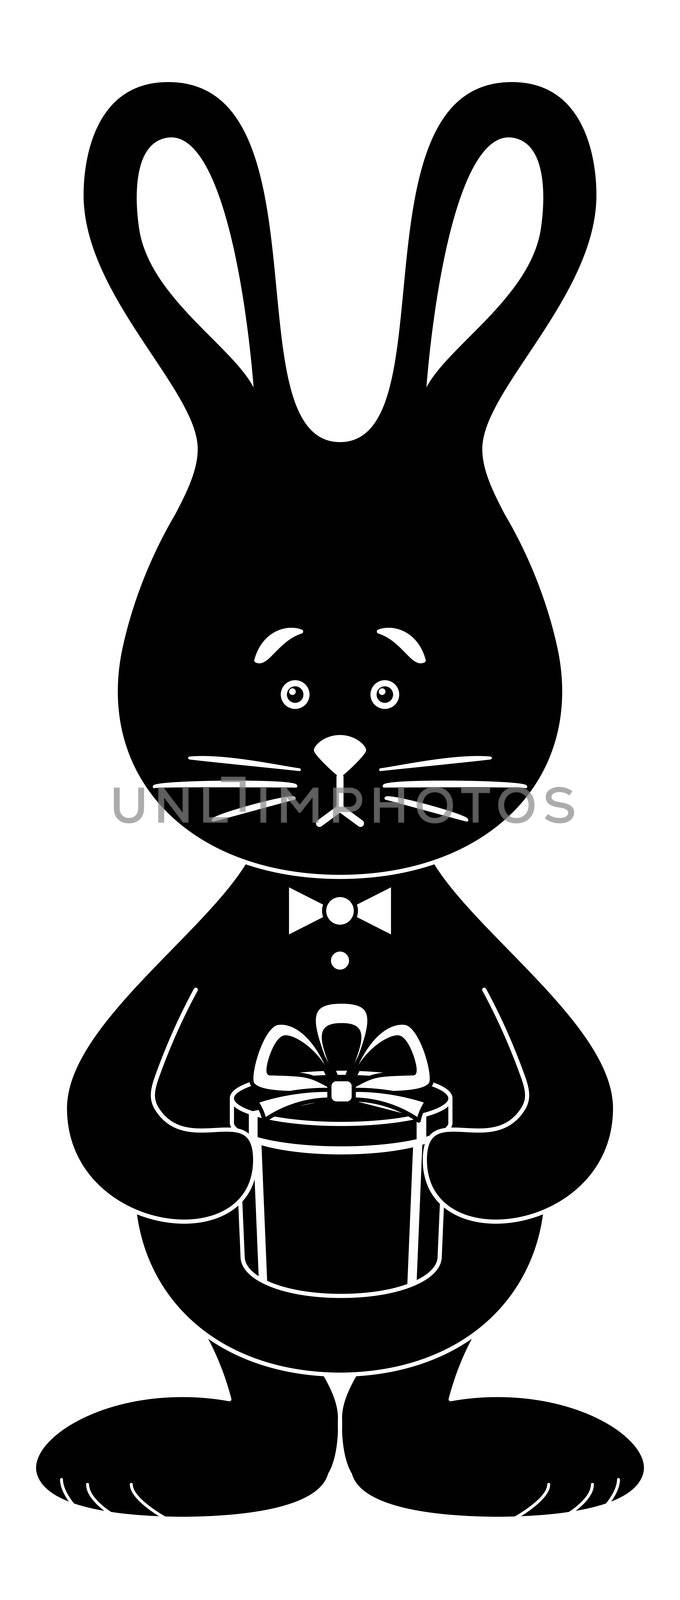 Rabbit with a gift box, silhouette by alexcoolok